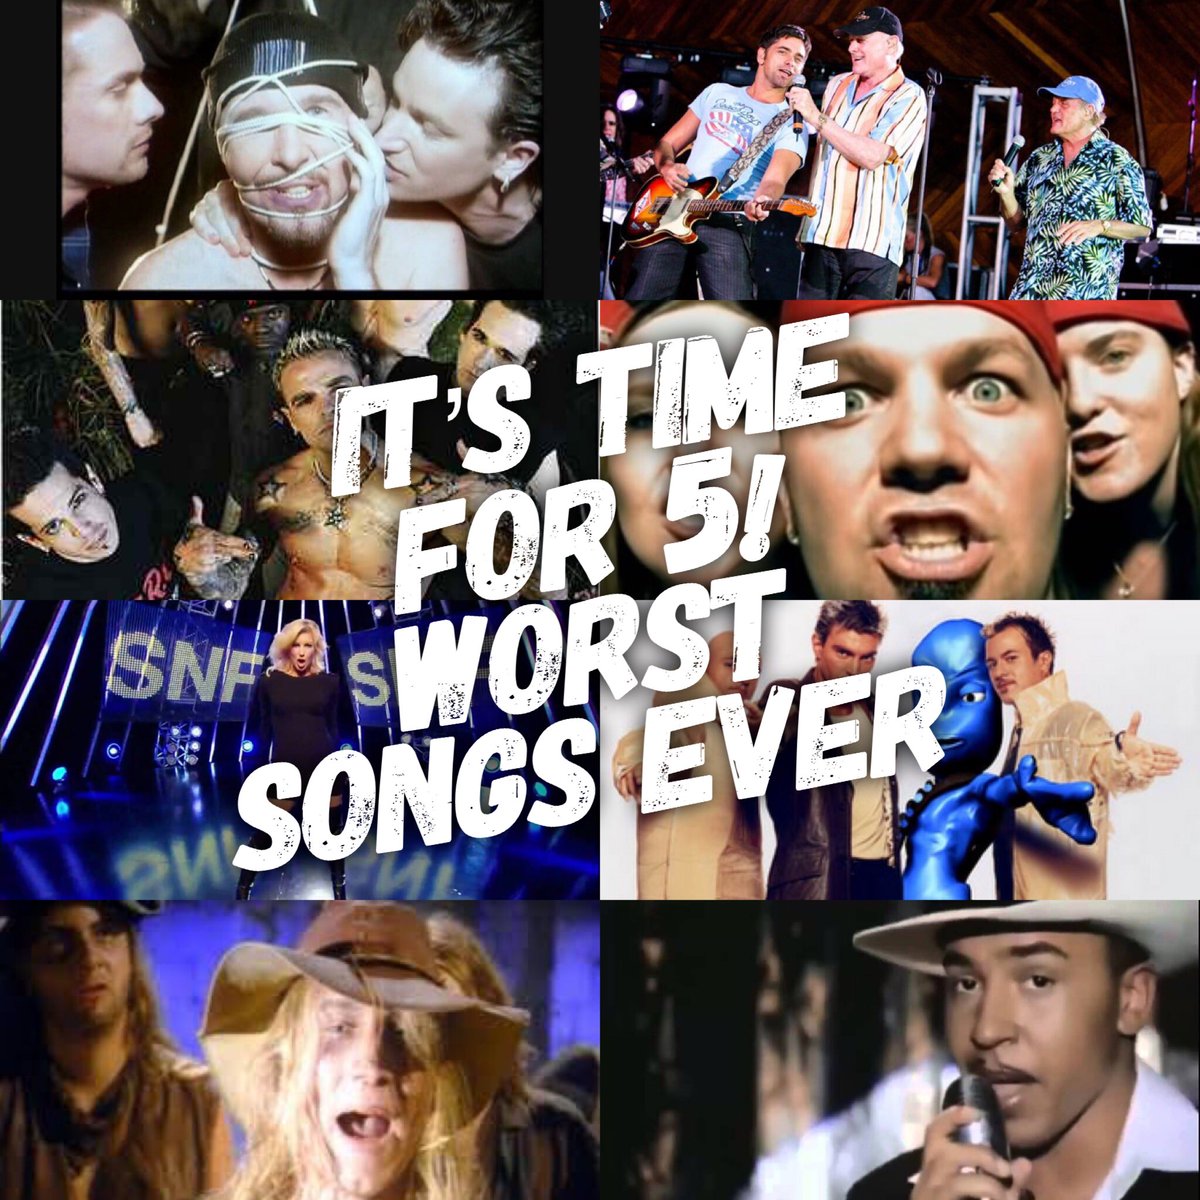 Today at 3 pm @JamisonRabbitt & @AnthonyDenu discuss the worst songs ever. Did #nickelback get their due? Find out by tuning in at 3pm cst via the 103.5 The Sun app